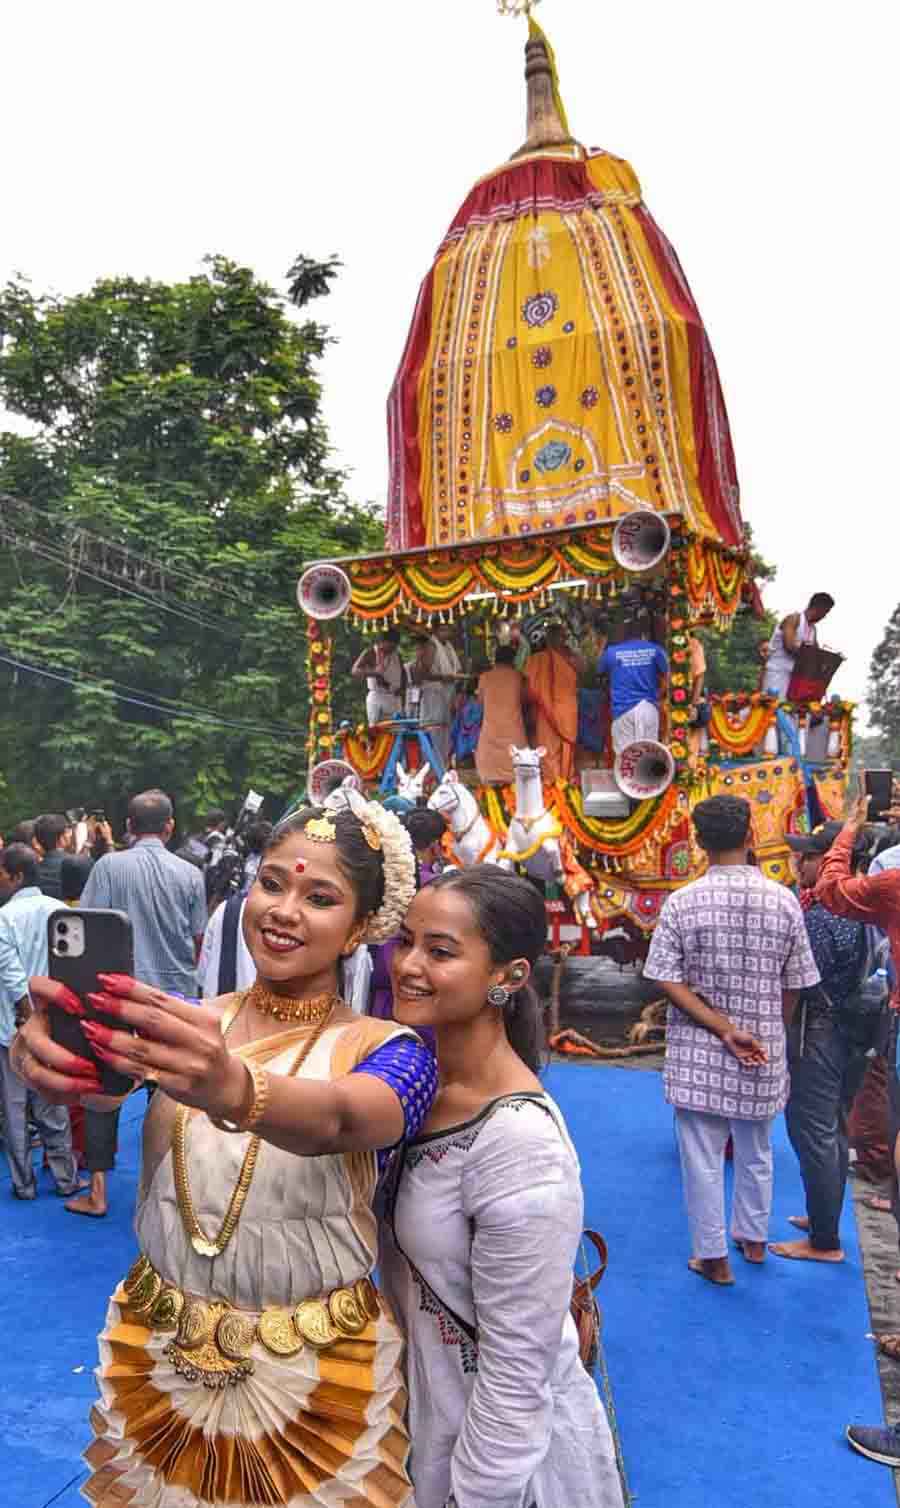  A performer was spotted taking a selfie in front of the Rath  